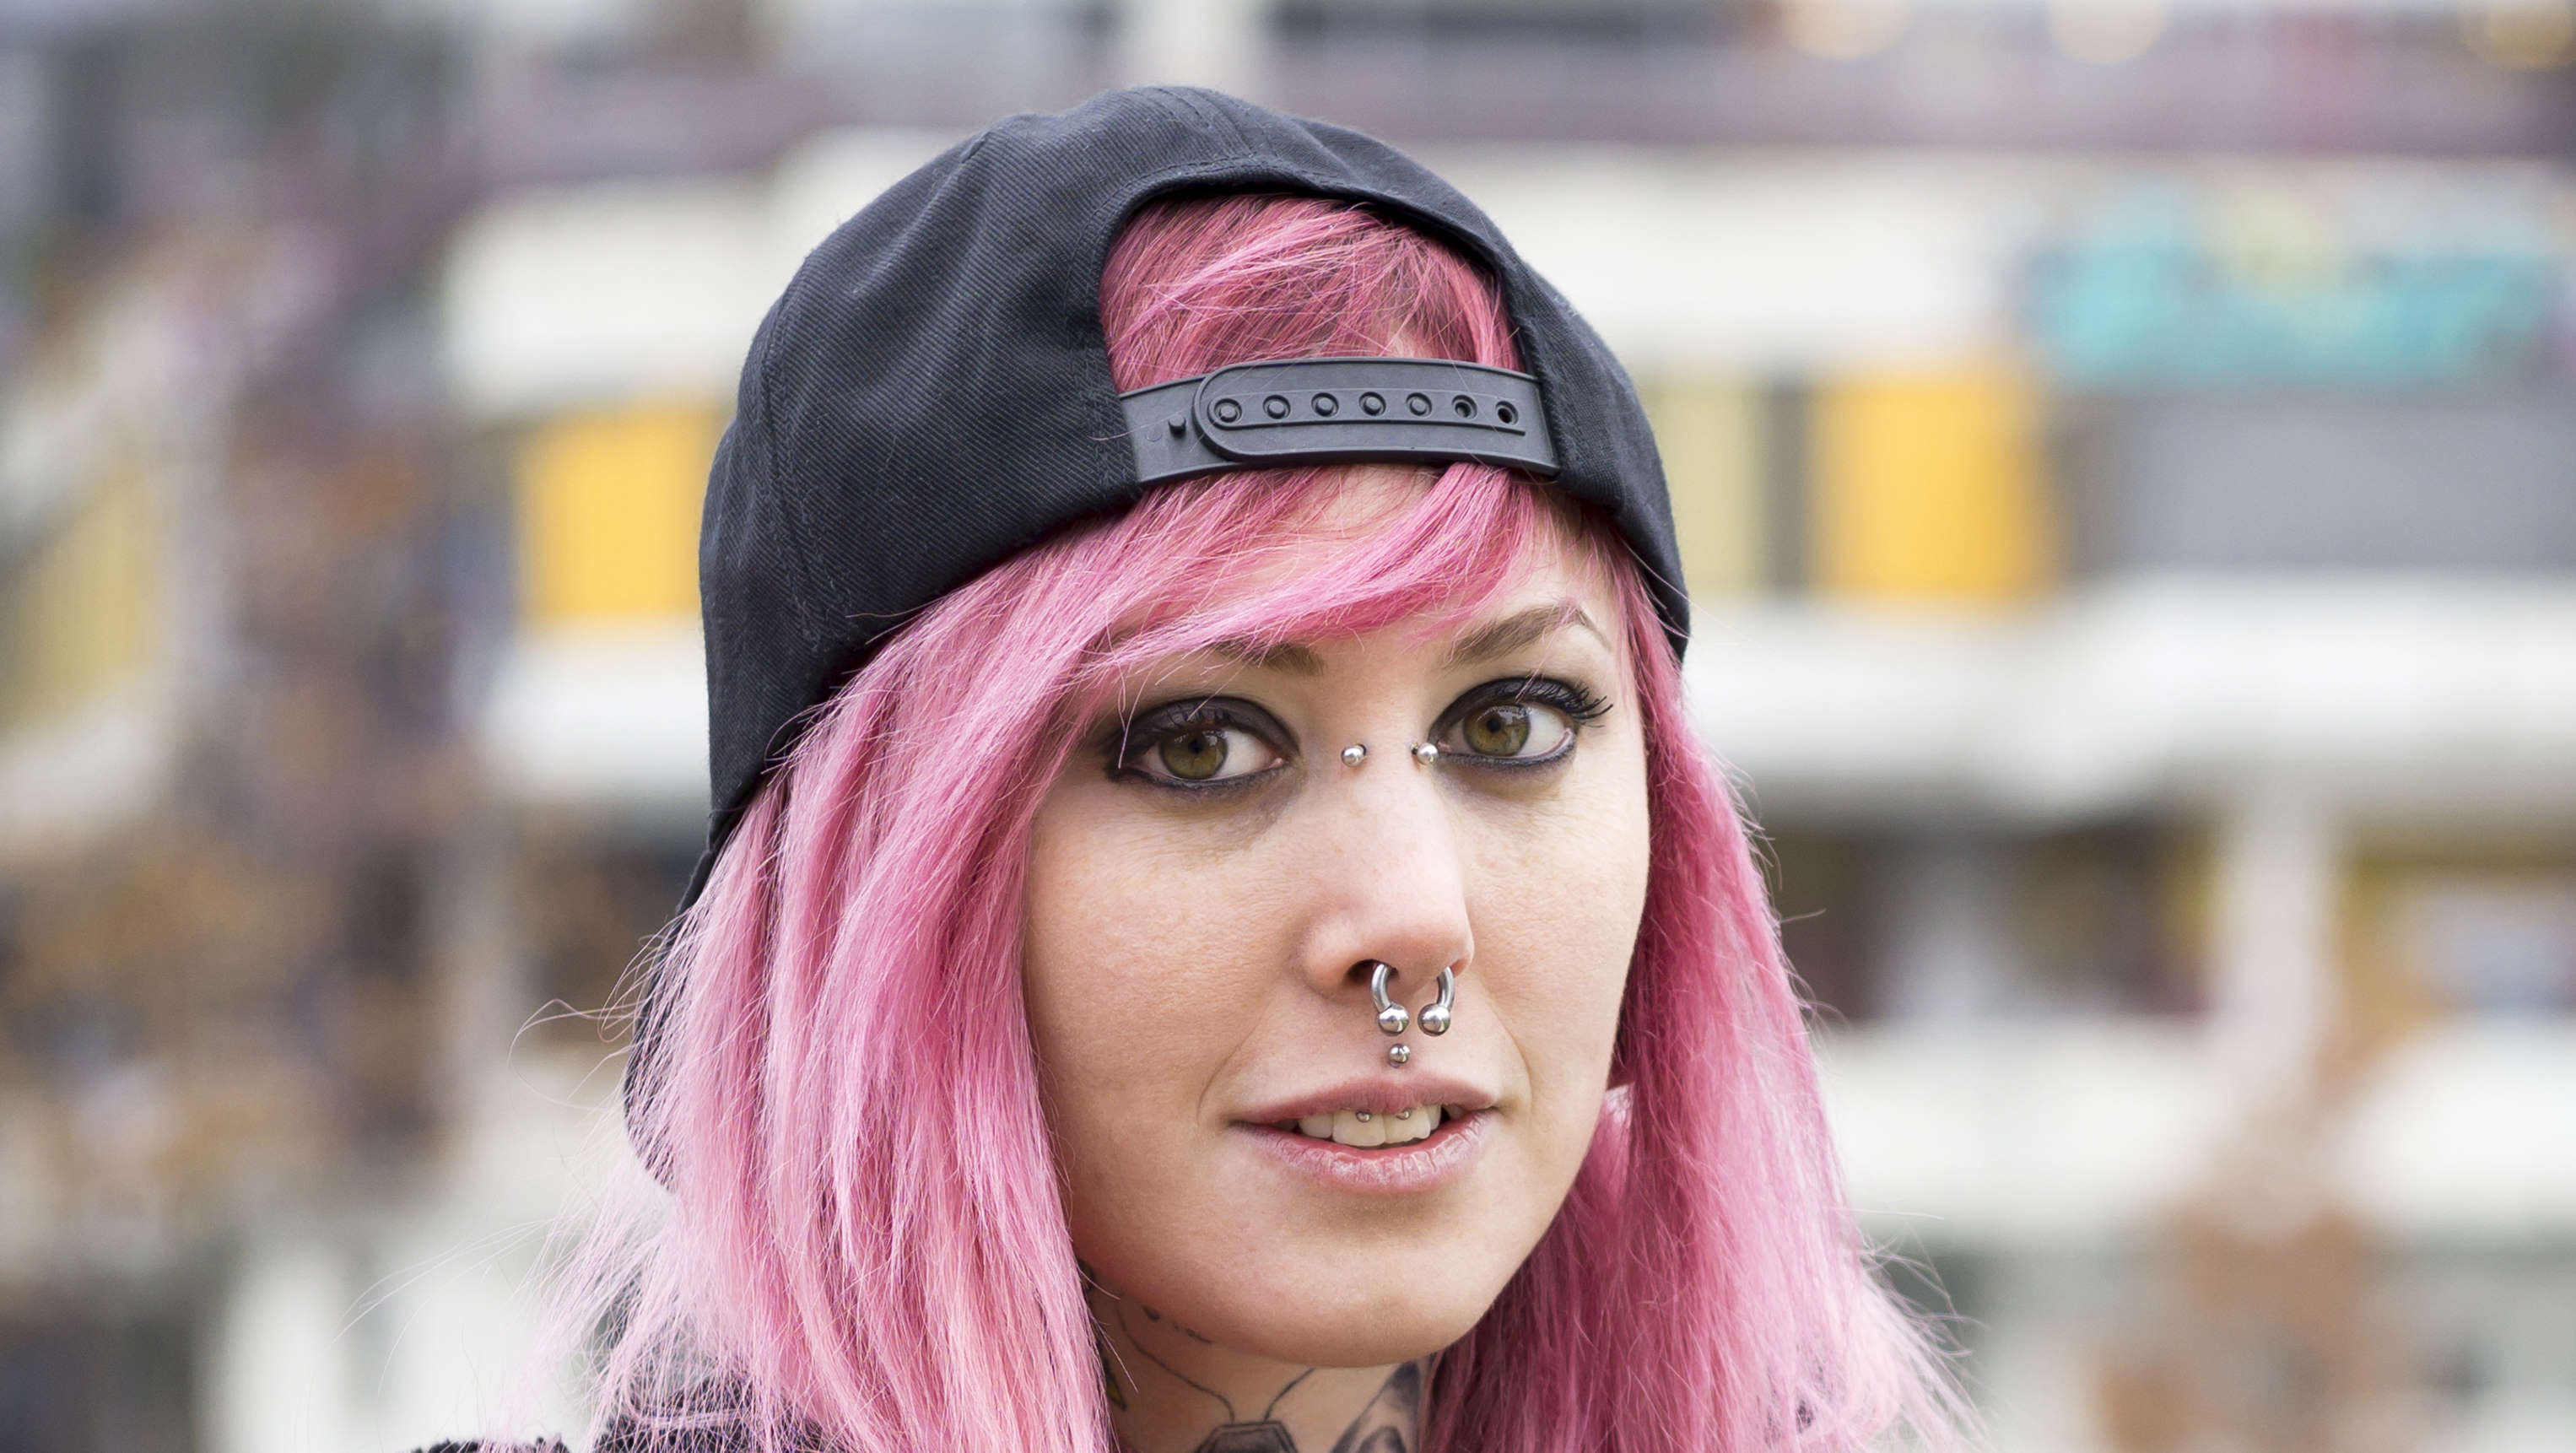 A female with pink hair along with a bridge piercing, septum piercing, and medusa piercing.